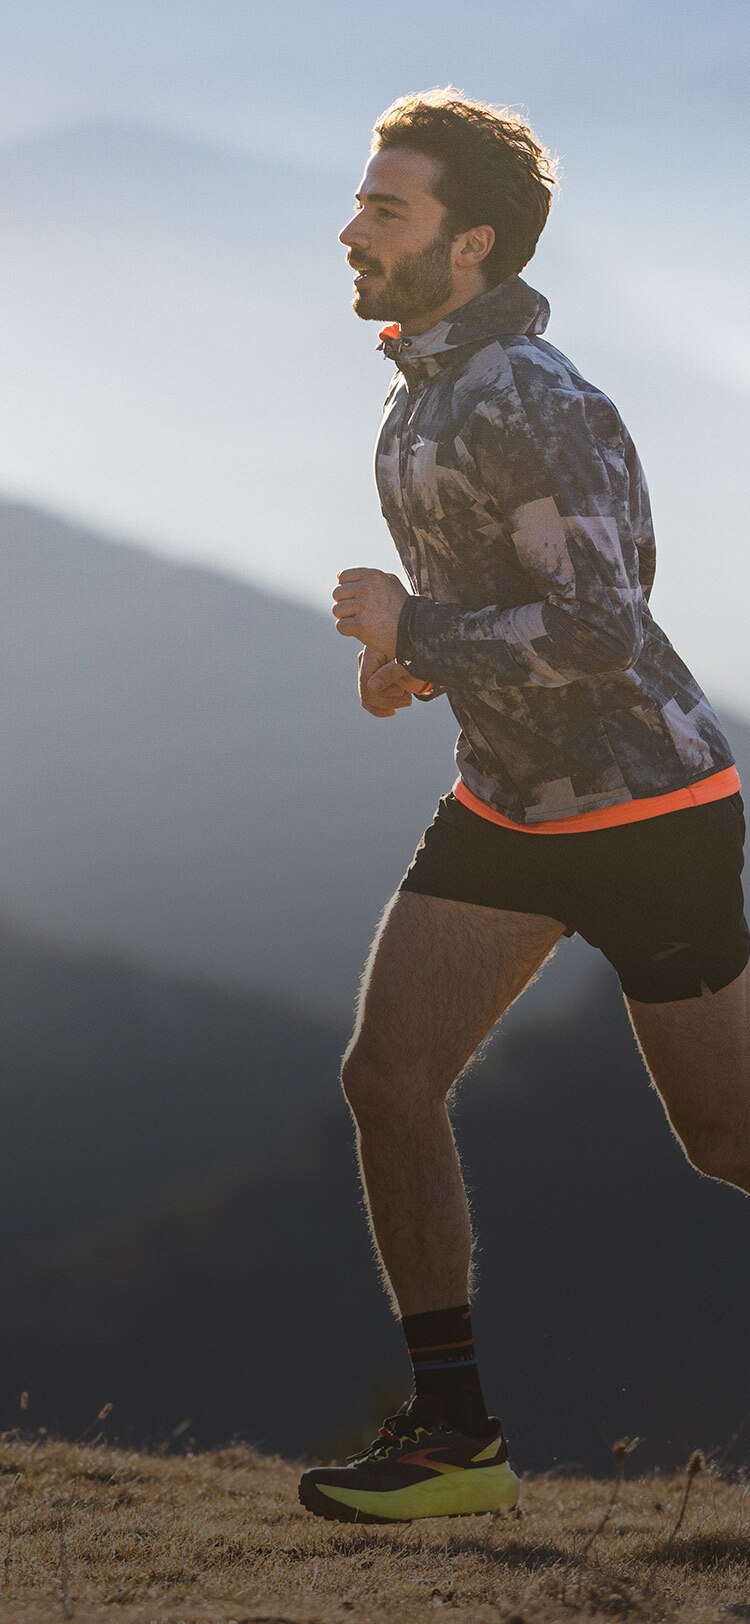 Models with Brooks apparel running on a trail track